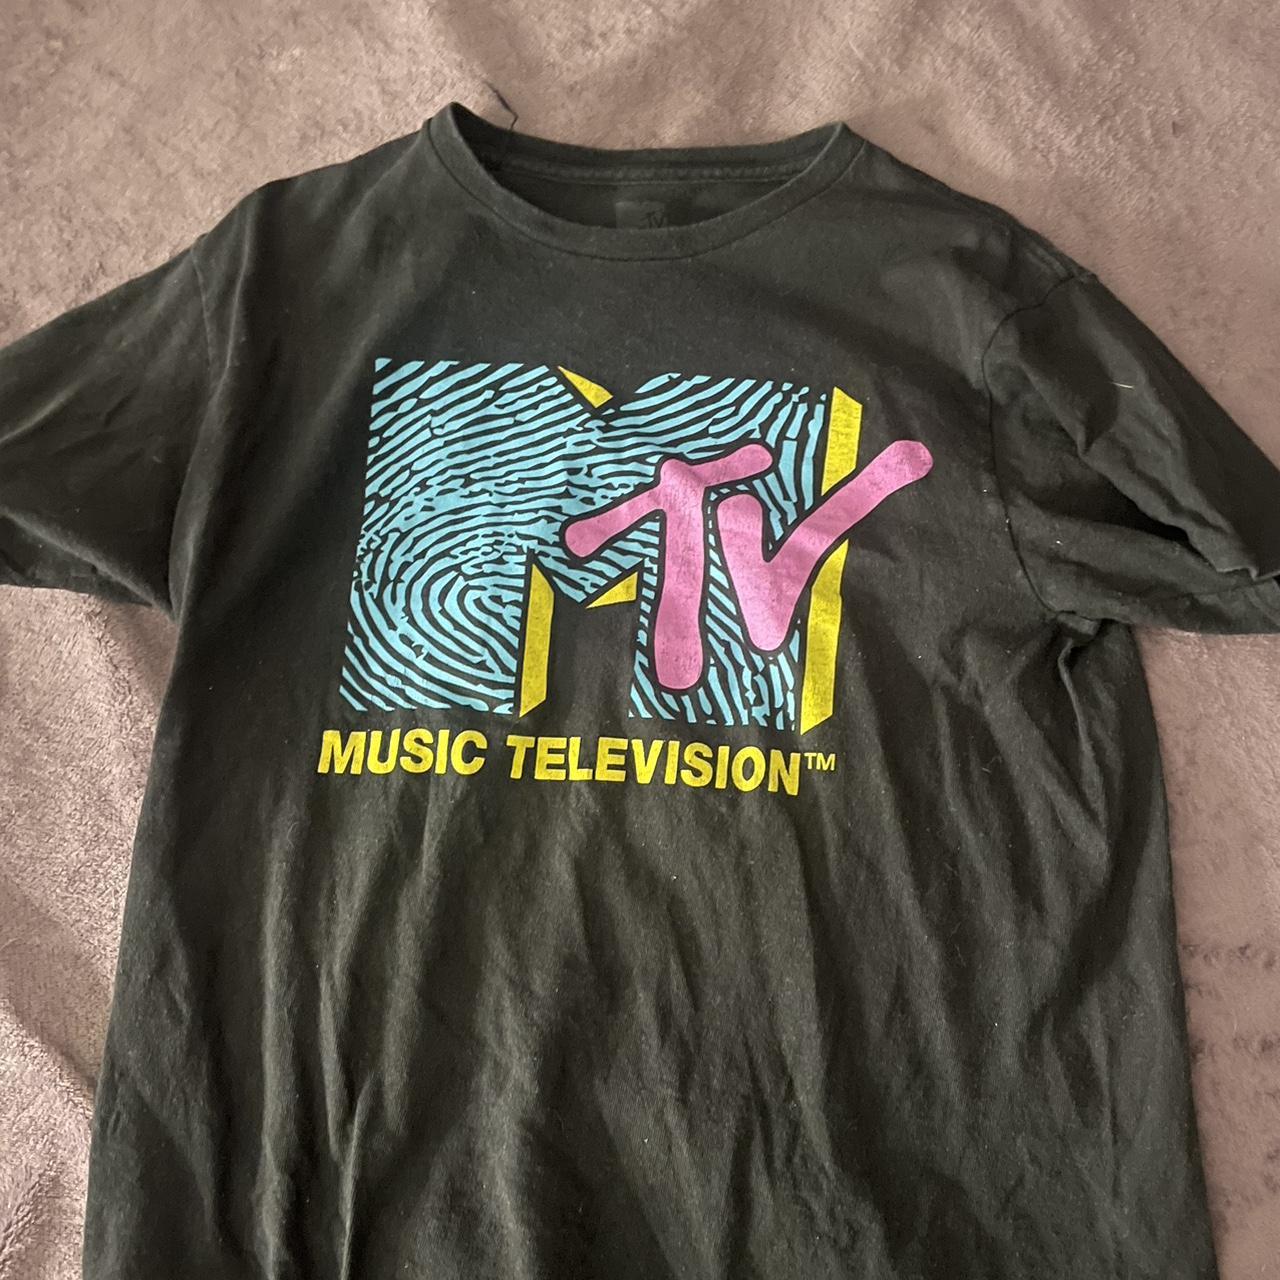 MTV shirt from the 80s - Depop